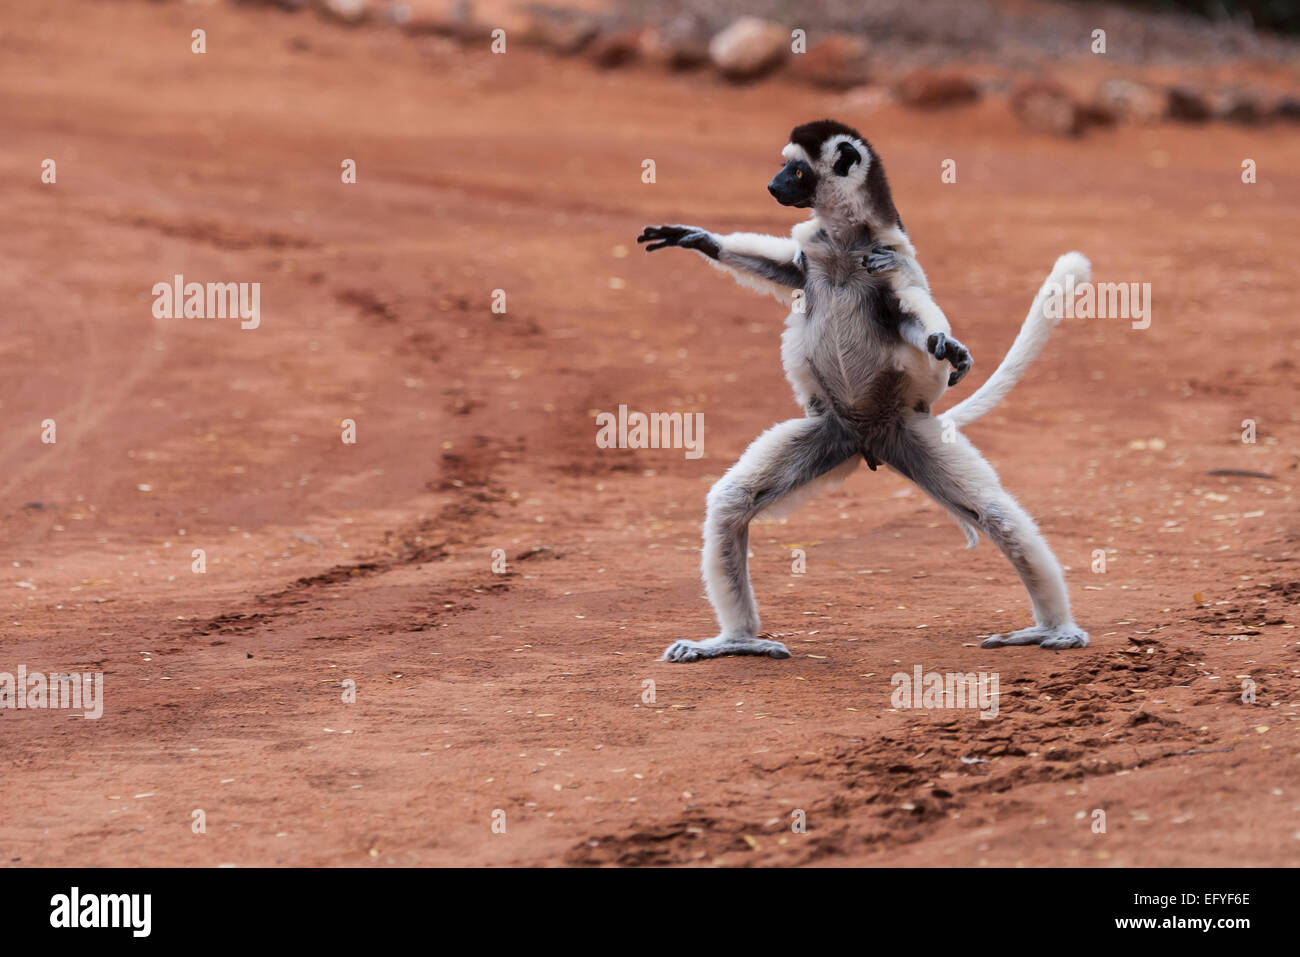 Madagascarien High Resolution Stock Photography and Images - Alamy